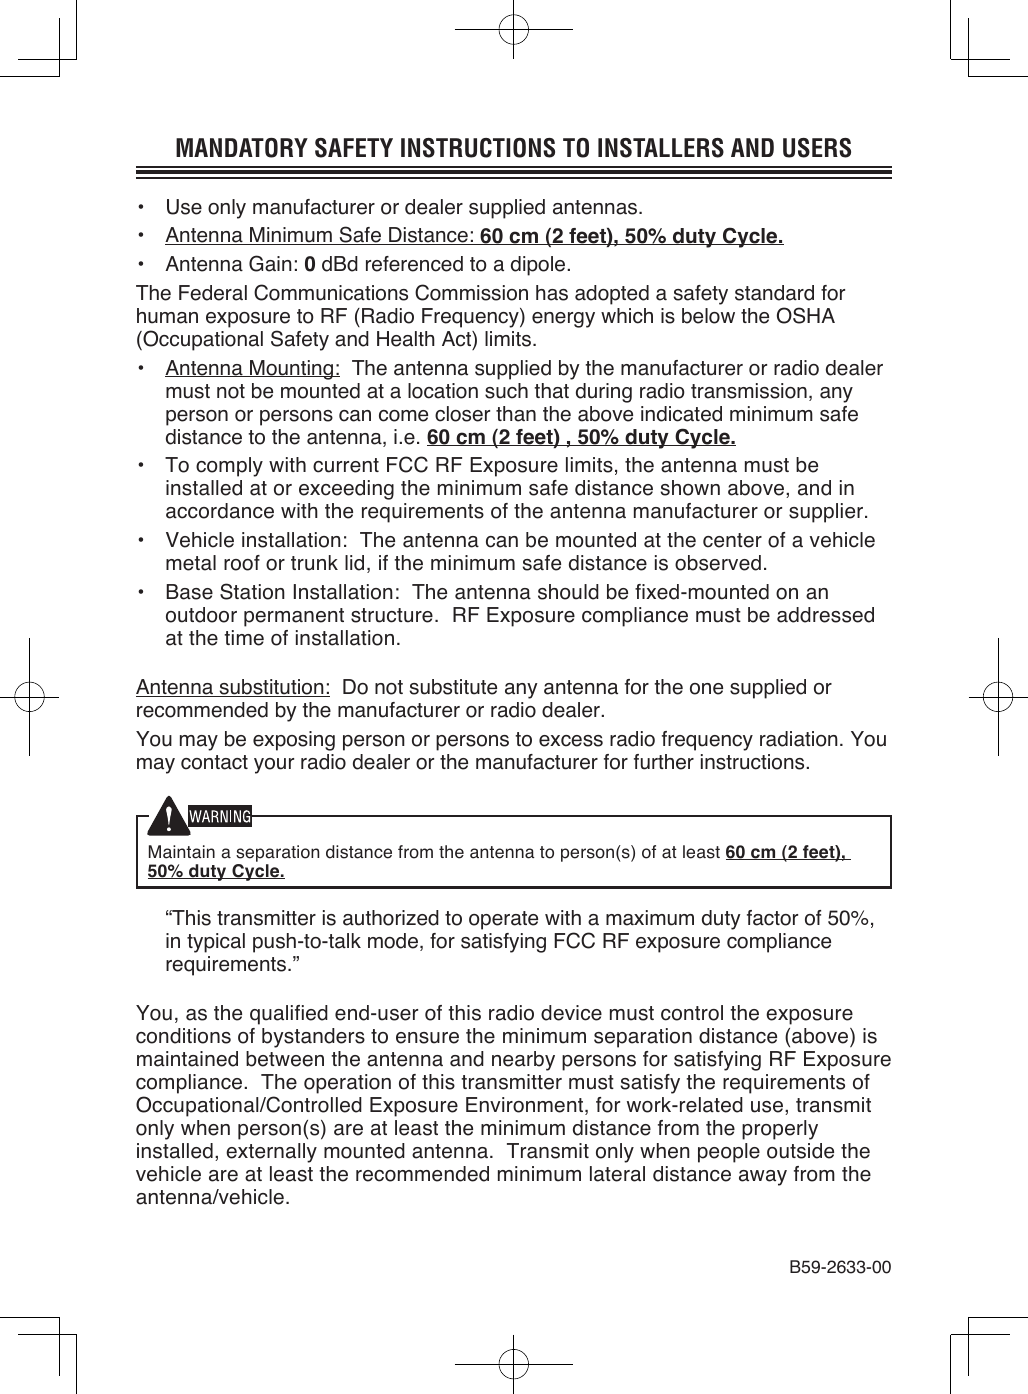 MANDATORY SAFETY INSTRUCTIONS TO INSTALLERS AND USERS•  Use only manufacturer or dealer supplied antennas.•  Antenna Minimum Safe Distance: 60 cm (2 feet), 50% duty Cycle.•  Antenna Gain: 0 dBd referenced to a dipole.The Federal Communications Commission has adopted a safety standard for human exposure to RF (Radio Frequency) energy which is below the OSHA (Occupational Safety and Health Act) limits.•  Antenna Mounting:  The antenna supplied by the manufacturer or radio dealer must not be mounted at a location such that during radio transmission, any person or persons can come closer than the above indicated minimum safe distance to the antenna, i.e. 60 cm (2 feet) , 50% duty Cycle.•  To comply with current FCC RF Exposure limits, the antenna must be installed at or exceeding the minimum safe distance shown above, and in accordance with the requirements of the antenna manufacturer or supplier.•  Vehicle installation:  The antenna can be mounted at the center of a vehicle metal roof or trunk lid, if the minimum safe distance is observed.•  Base Station Installation:  The antenna should be fixed-mounted on an outdoor permanent structure.  RF Exposure compliance must be addressed at the time of installation.Antenna substitution:  Do not substitute any antenna for the one supplied or recommended by the manufacturer or radio dealer.You may be exposing person or persons to excess radio frequency radiation. You may contact your radio dealer or the manufacturer for further instructions.Maintain a separation distance from the antenna to person(s) of at least 60 cm (2 feet), 50% duty Cycle.  “This transmitter is authorized to operate with a maximum duty factor of 50%, in typical push-to-talk mode, for satisfying FCC RF exposure compliance requirements.”You, as the qualified end-user of this radio device must control the exposure conditions of bystanders to ensure the minimum separation distance (above) is maintained between the antenna and nearby persons for satisfying RF Exposure compliance.  The operation of this transmitter must satisfy the requirements of Occupational/Controlled Exposure Environment, for work-related use, transmit only when person(s) are at least the minimum distance from the properly installed, externally mounted antenna.  Transmit only when people outside the vehicle are at least the recommended minimum lateral distance away from the antenna/vehicle.B59-2633-00